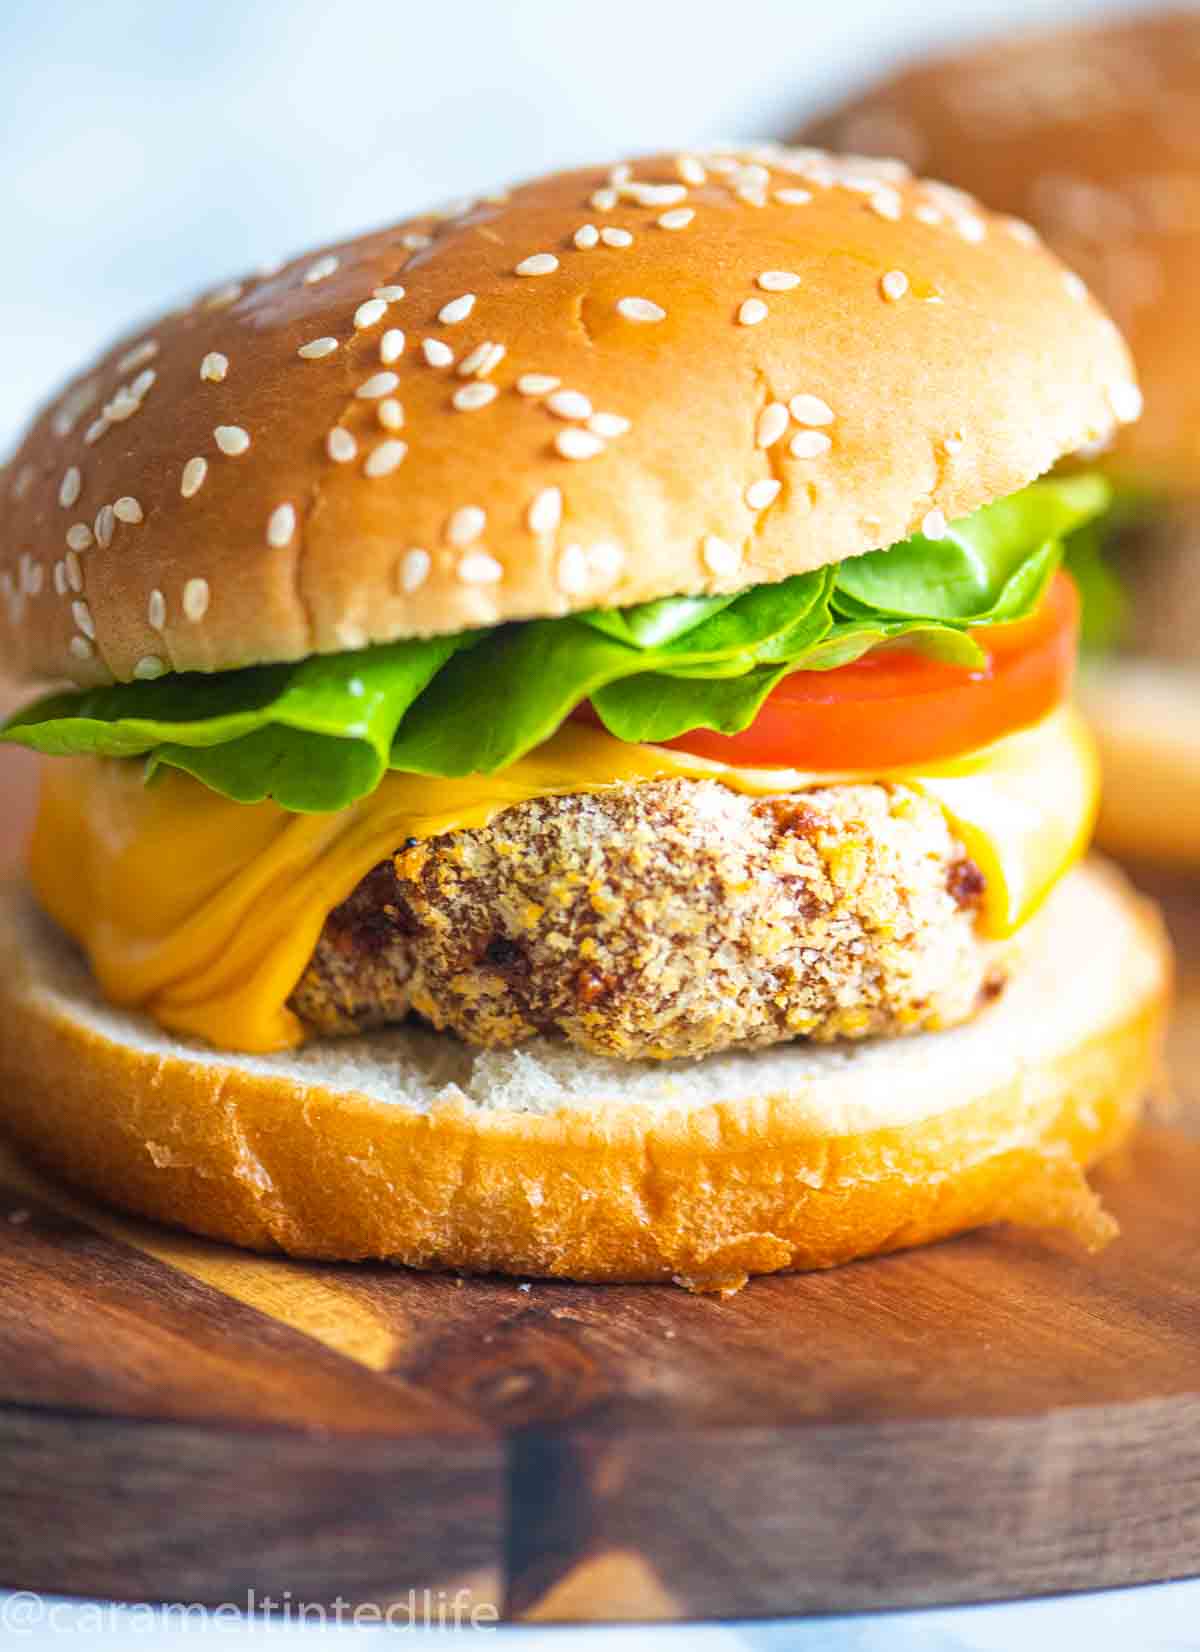 a Close up of a chicken burger on a wooden surface